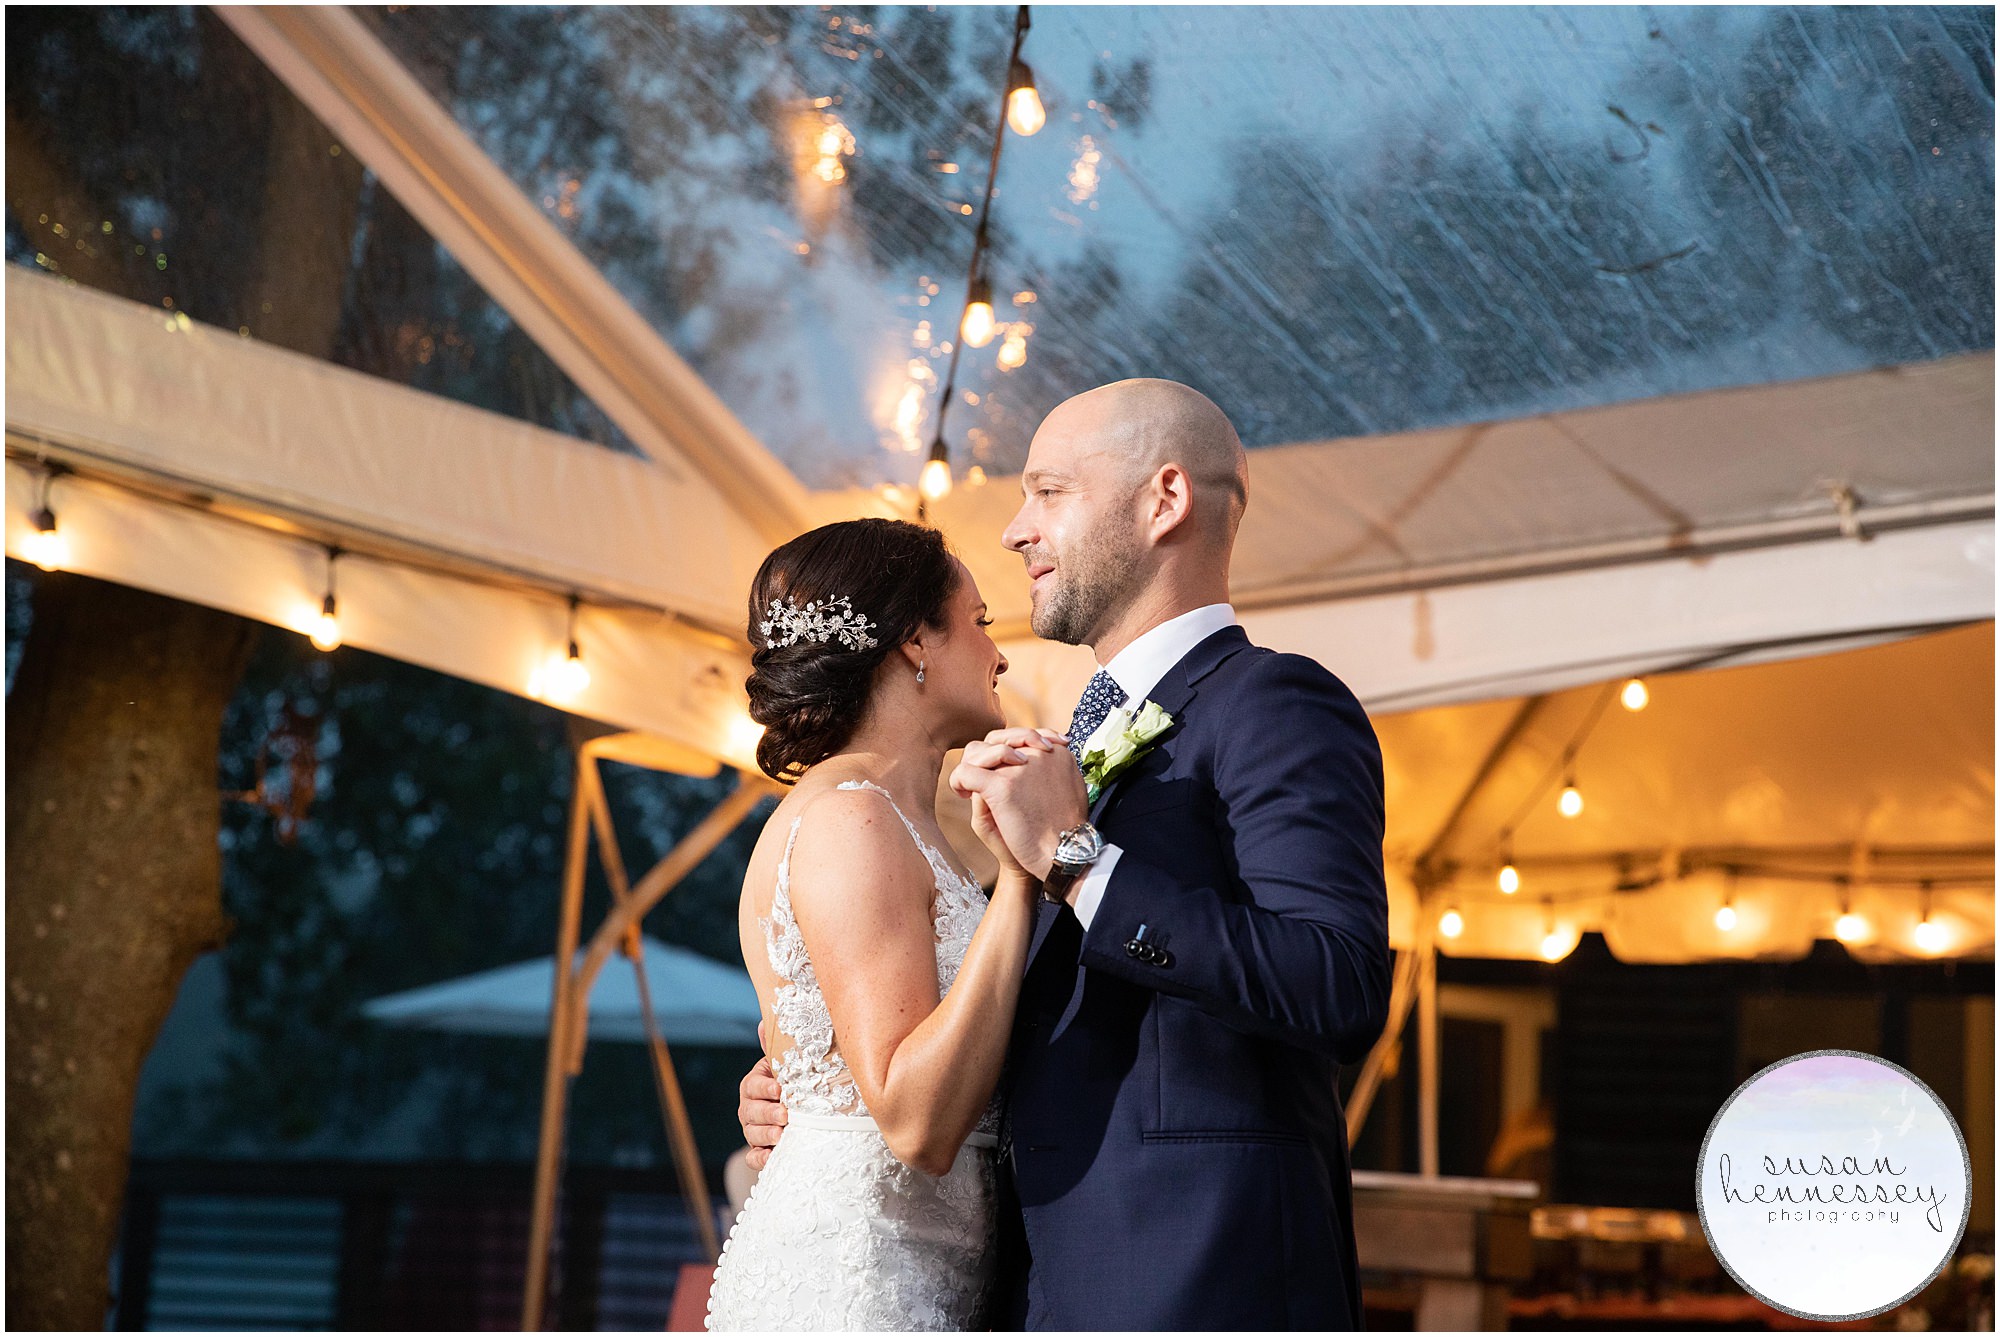 Thunderstorms during first dance made for an epic moment at tented wedding